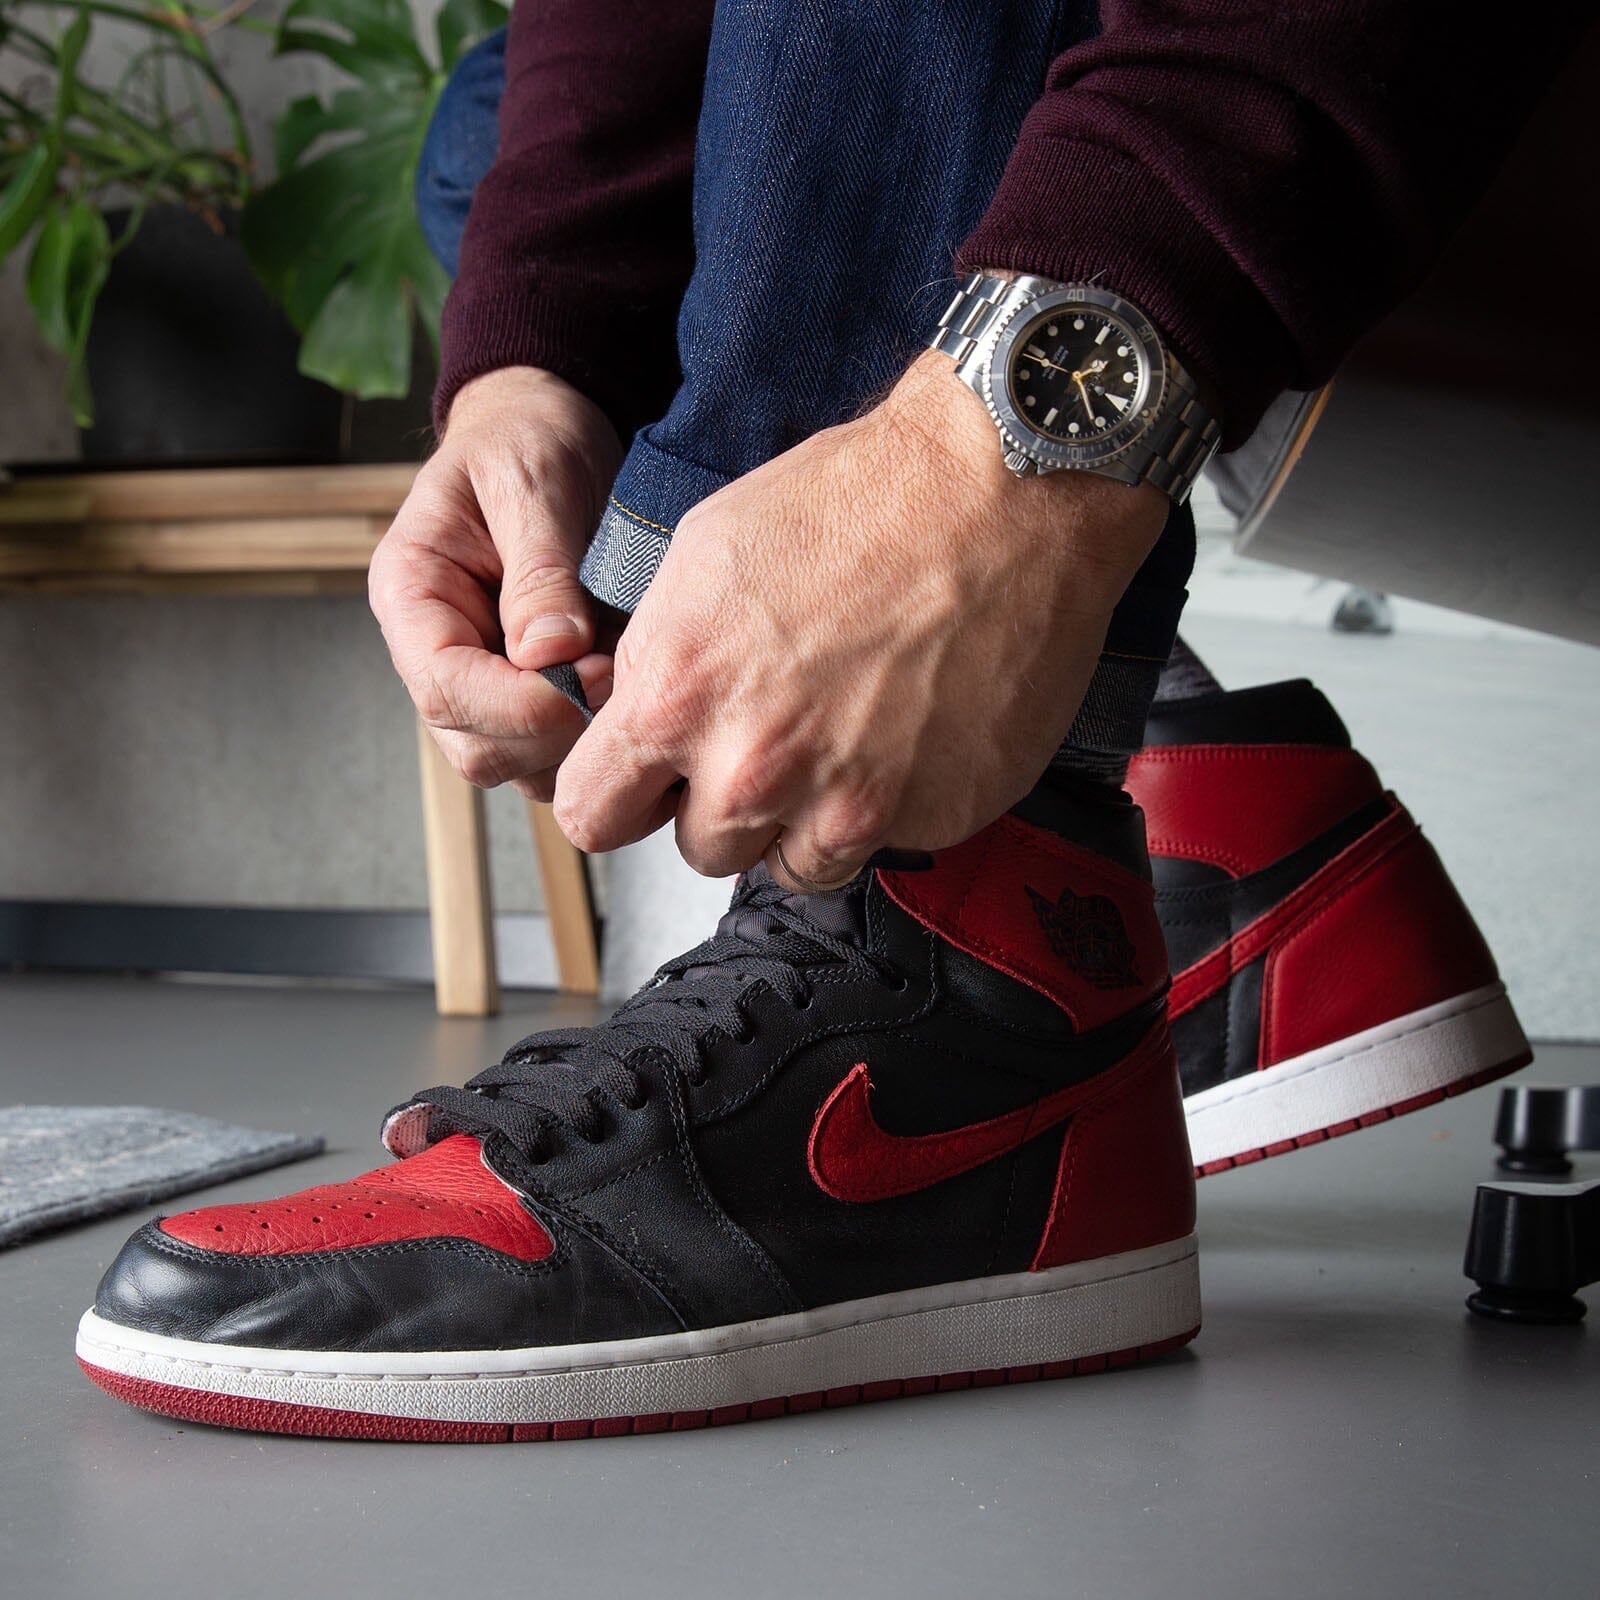 Bleeding Black and Red: Examining the Iconic Air Jordan 1 'Bred' and i